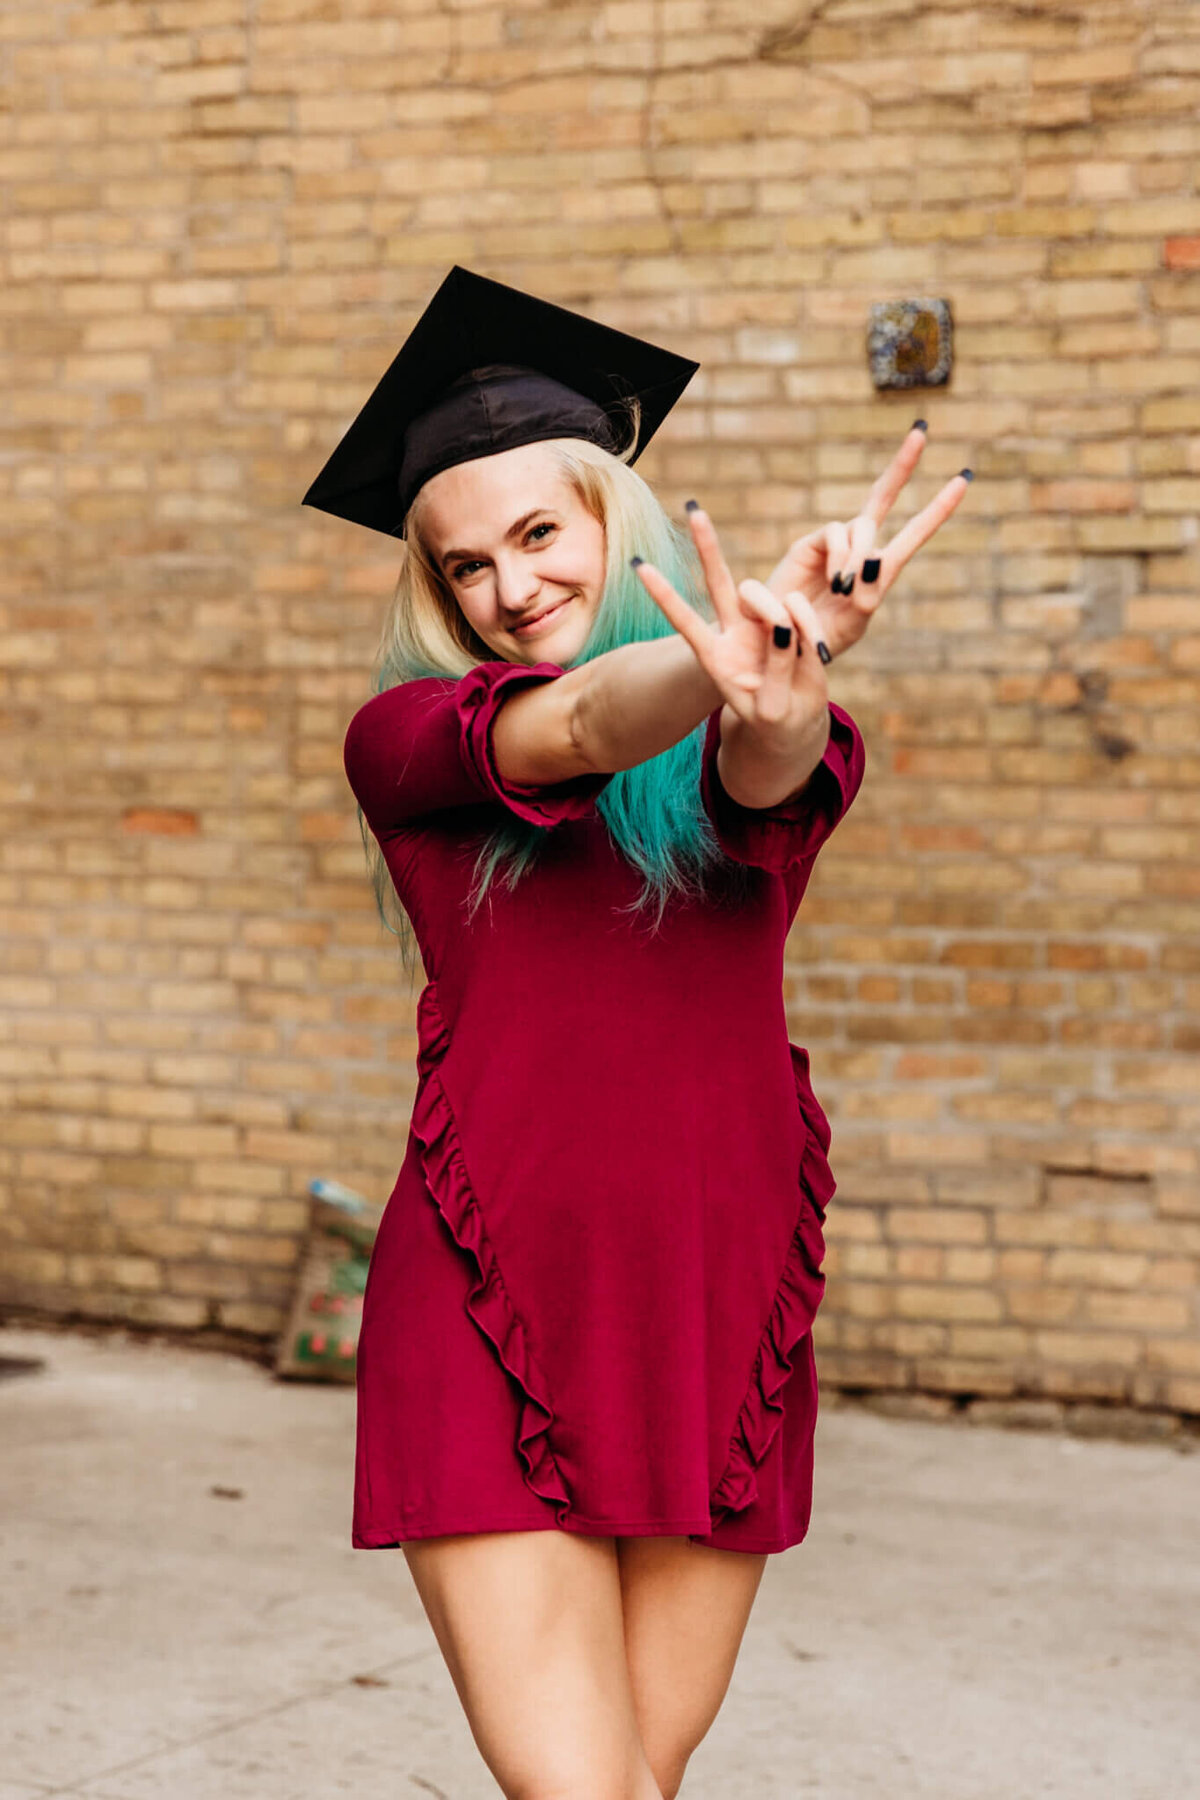 high school graduate holding up two fingers with each hand for cap and gown photo session